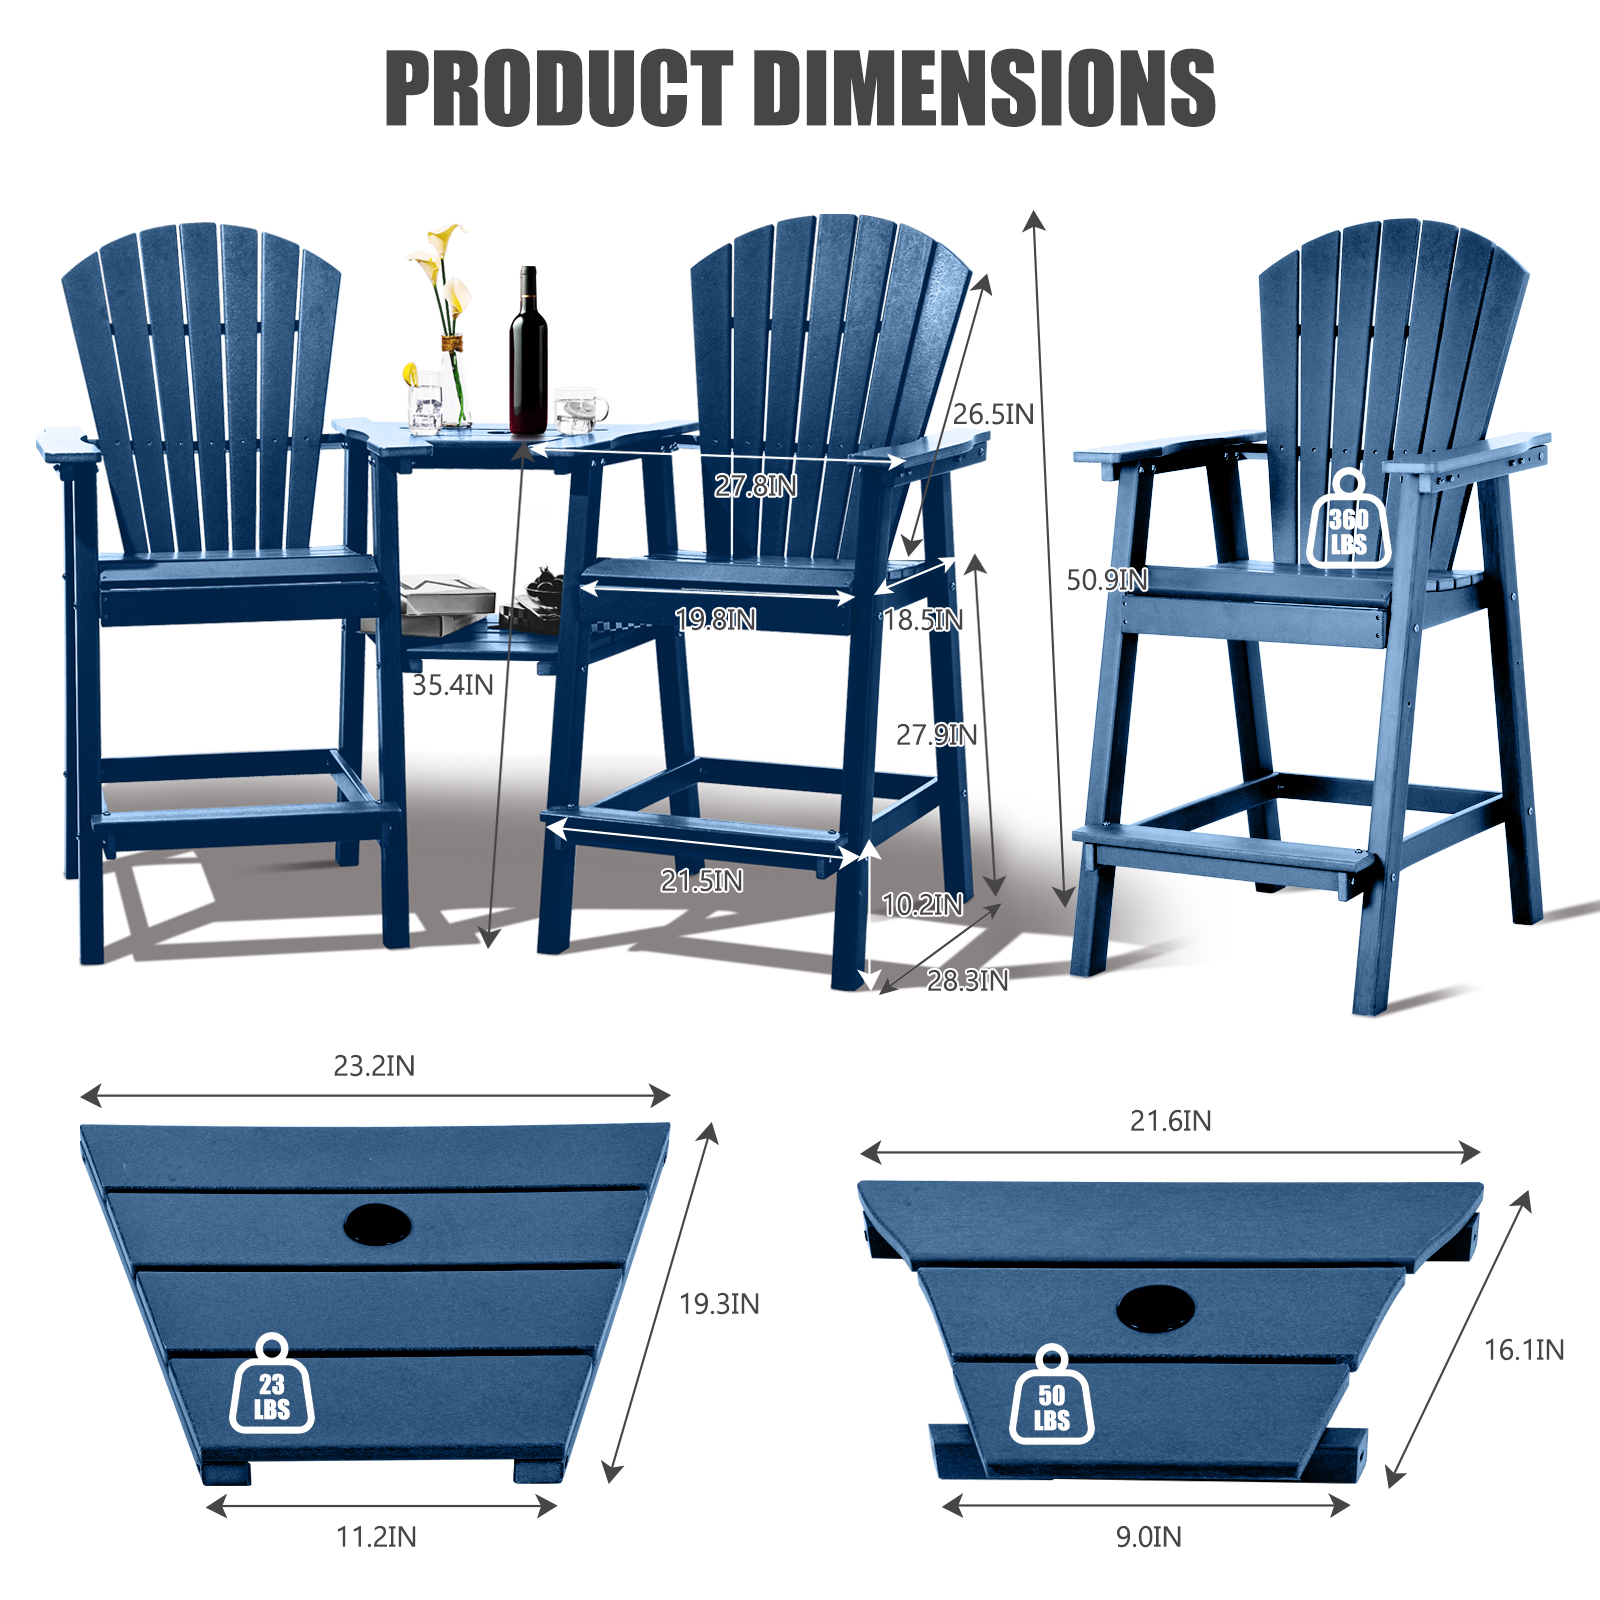 Tall Adirondack Chairs Set of 2，Outdoor Adirondack Barstools with Double Connecting Tray Patio Stools Weather Resistant for Outdoor Deck Lawn Pool Backyard,Navy Blue - image 4 of 7